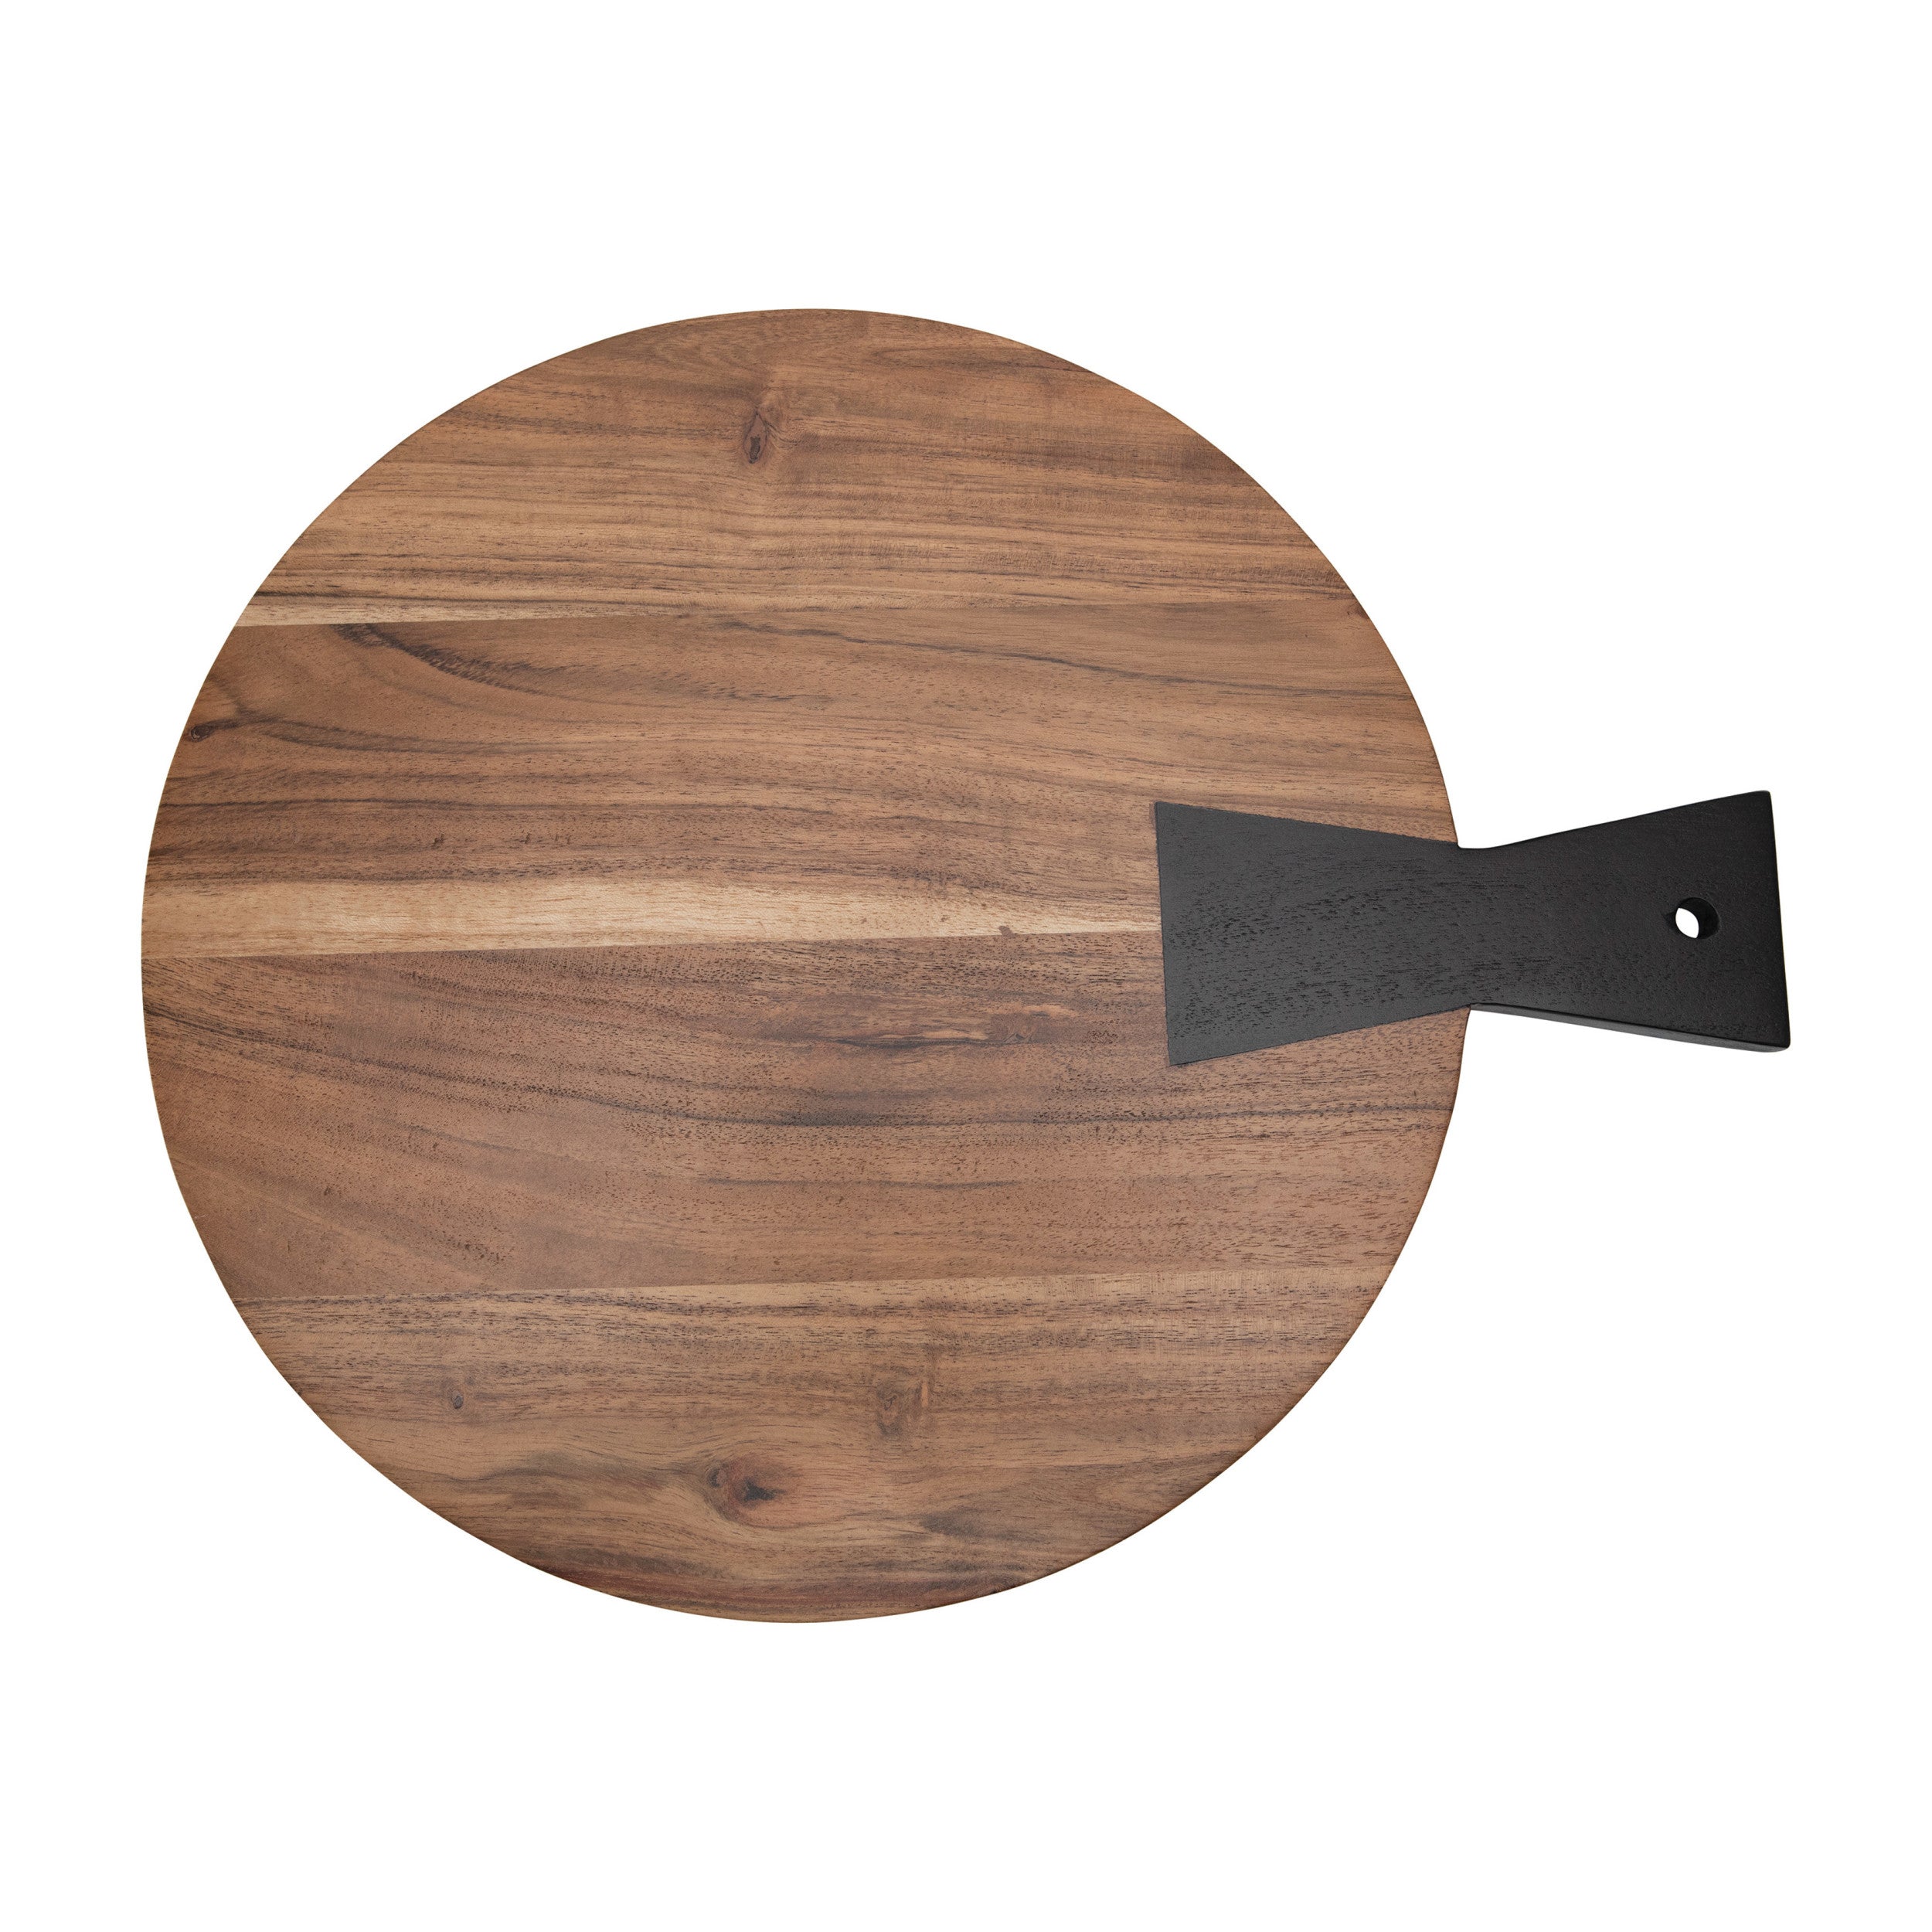 Two-Tone Acacia Wood Cheese/Cutting Board with Black Tail Joint Handle